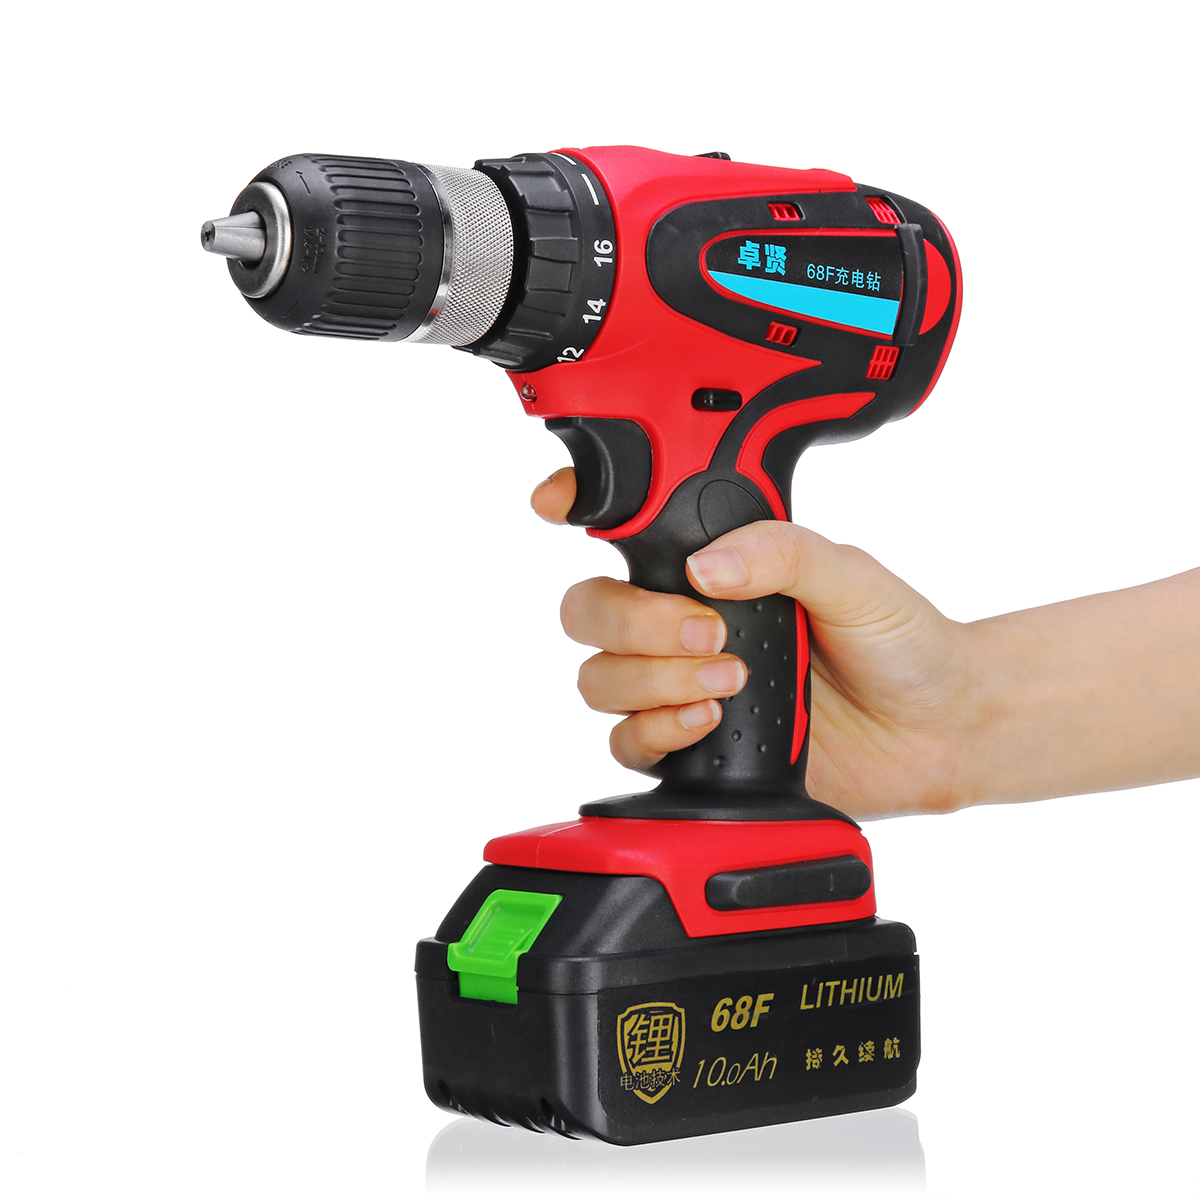 68V-10Ah-Cordless-Rechargeable-Electric-Drill-2-Speed-Heavy-Duty-Torque-Power-Drills-1403940-7